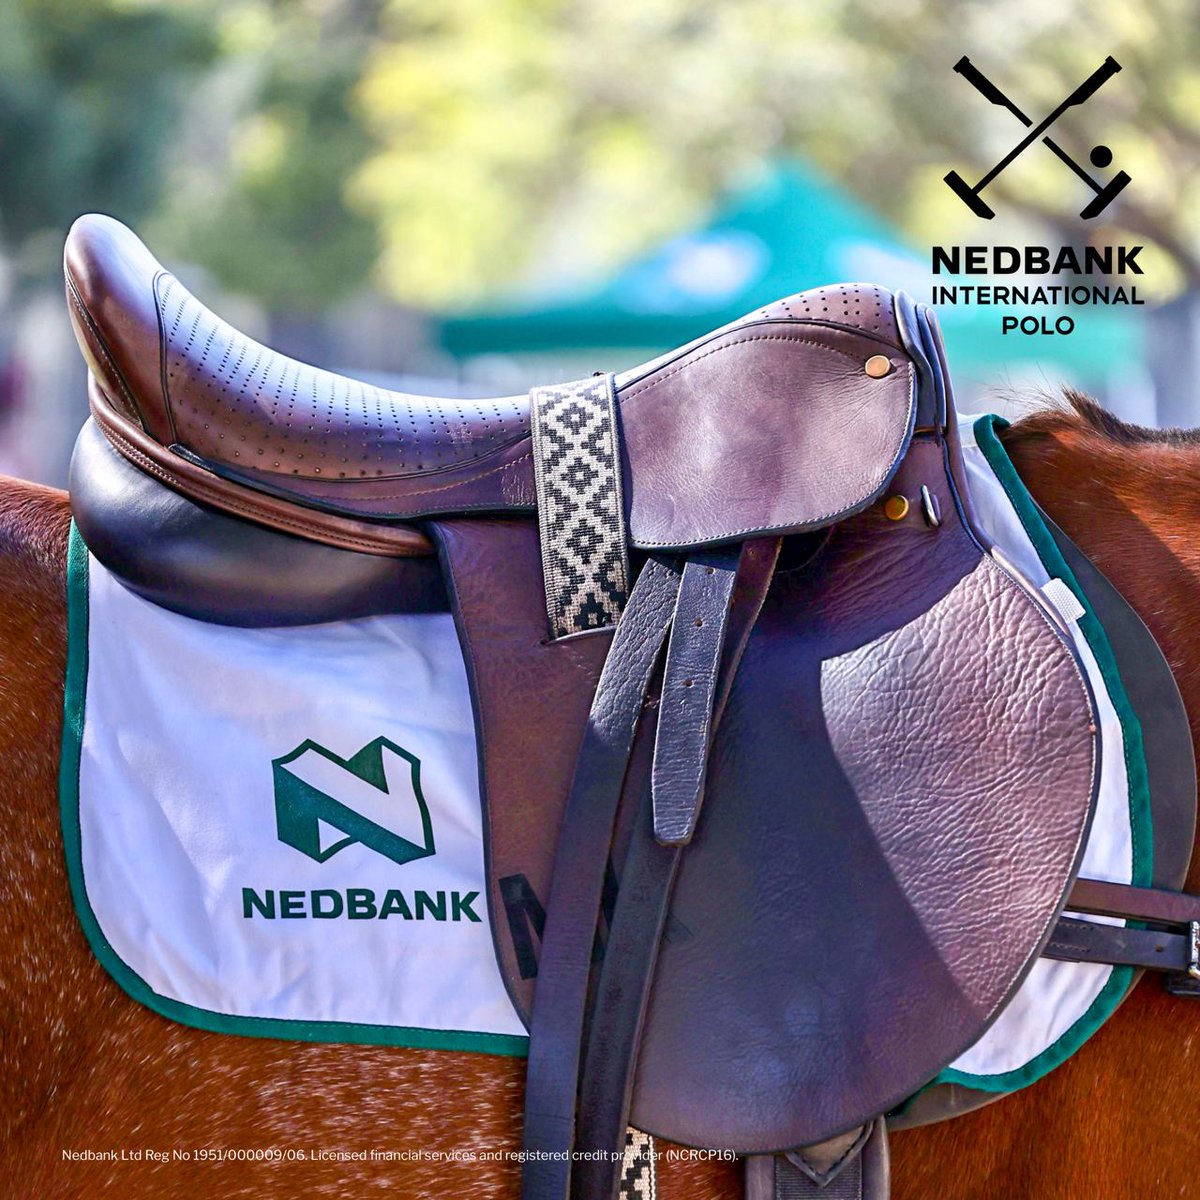 It’s almost game time! 🏇 Who is up against South Africa in the main match of the day? RT and comment with your answer using #NedbankPolo, and you could win 1 of 5 Avo vouchers worth R500!  T&Cs apply.